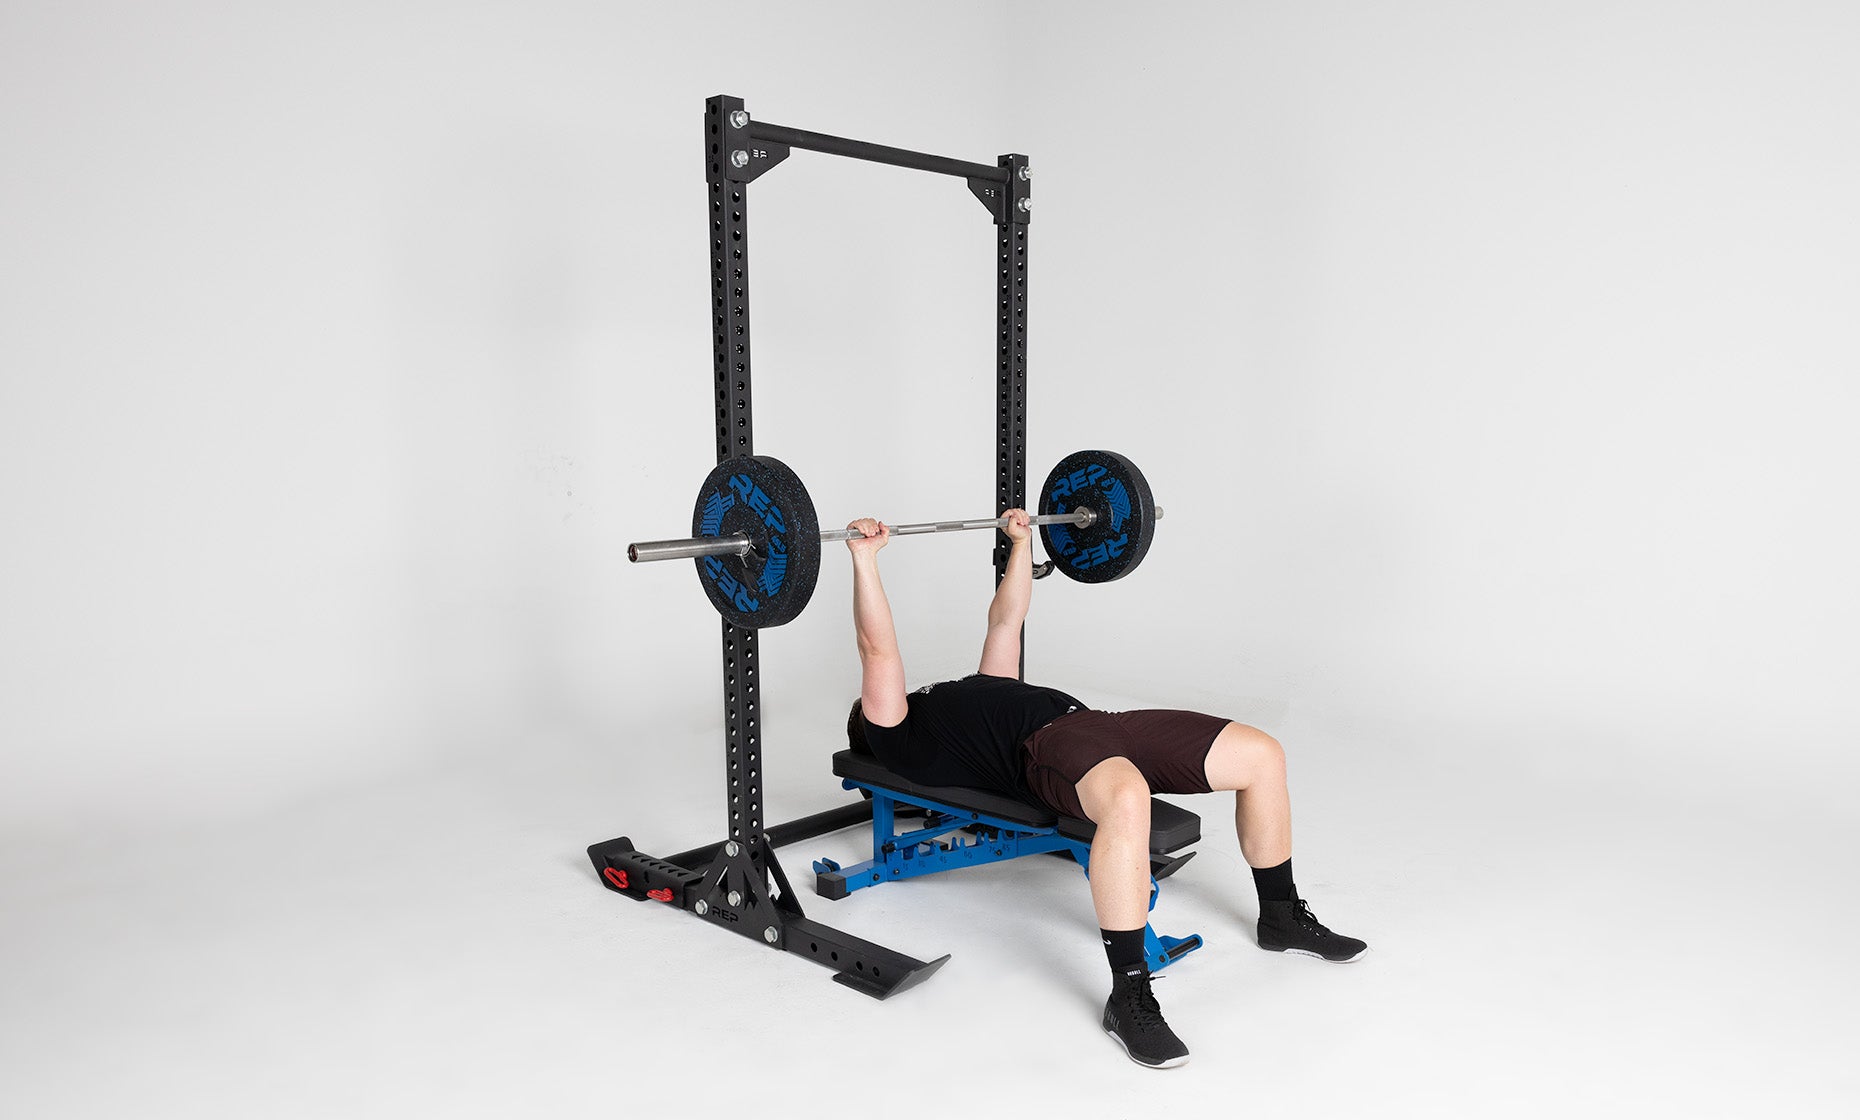 Oxylus Yoke With Pull-Up Bar Being Used For Bench Press